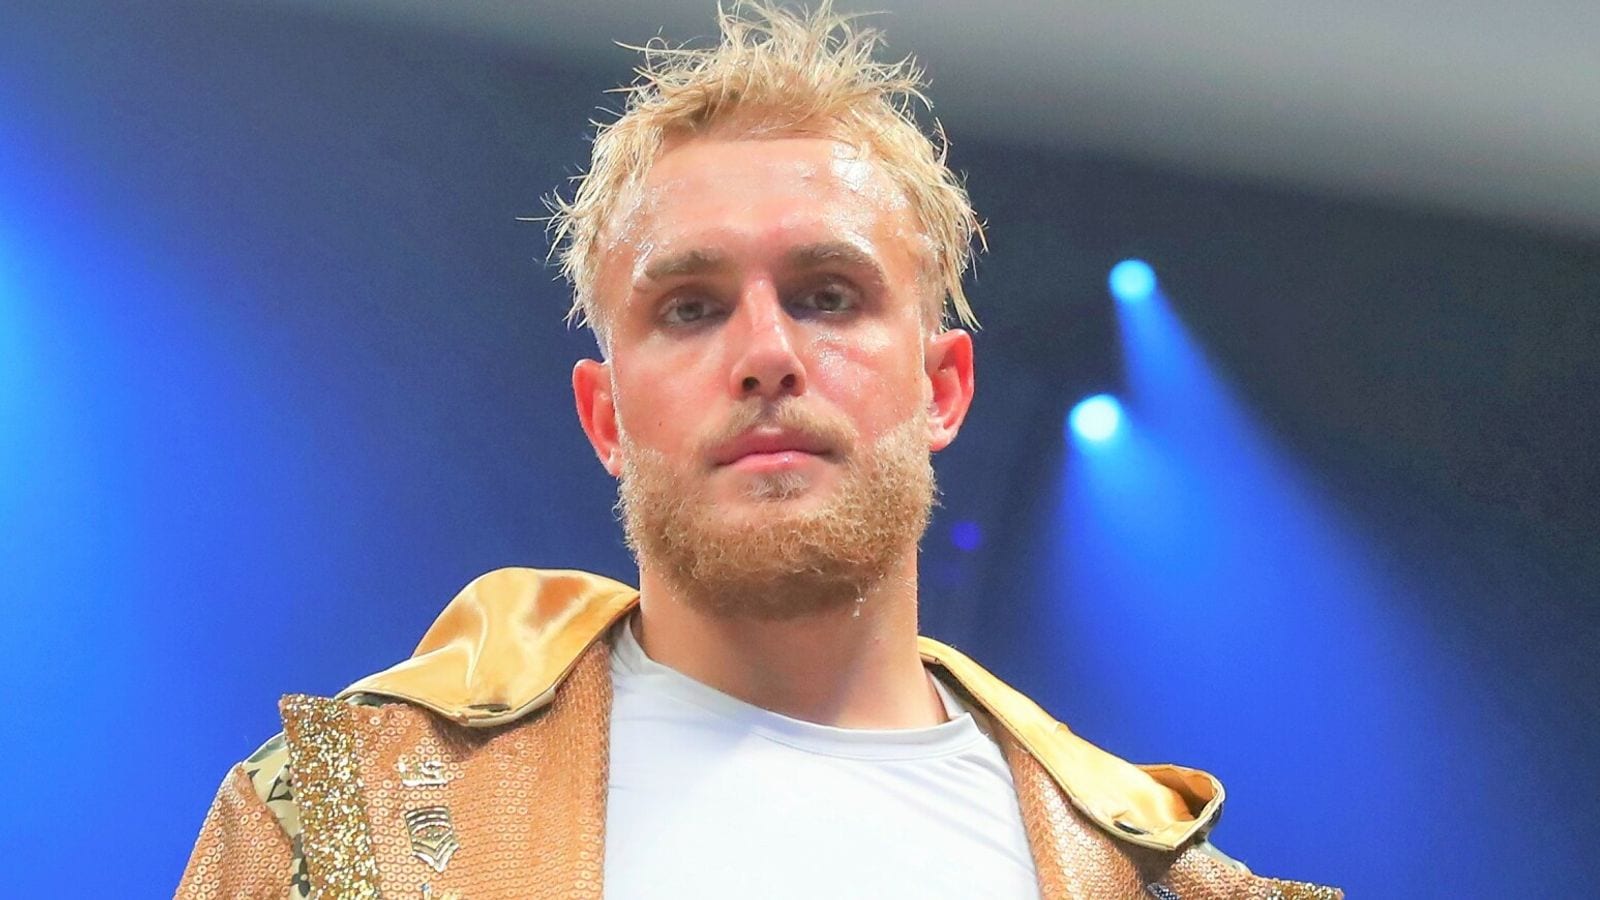 Jake Paul Net Worth: What Are His Sources of Income?